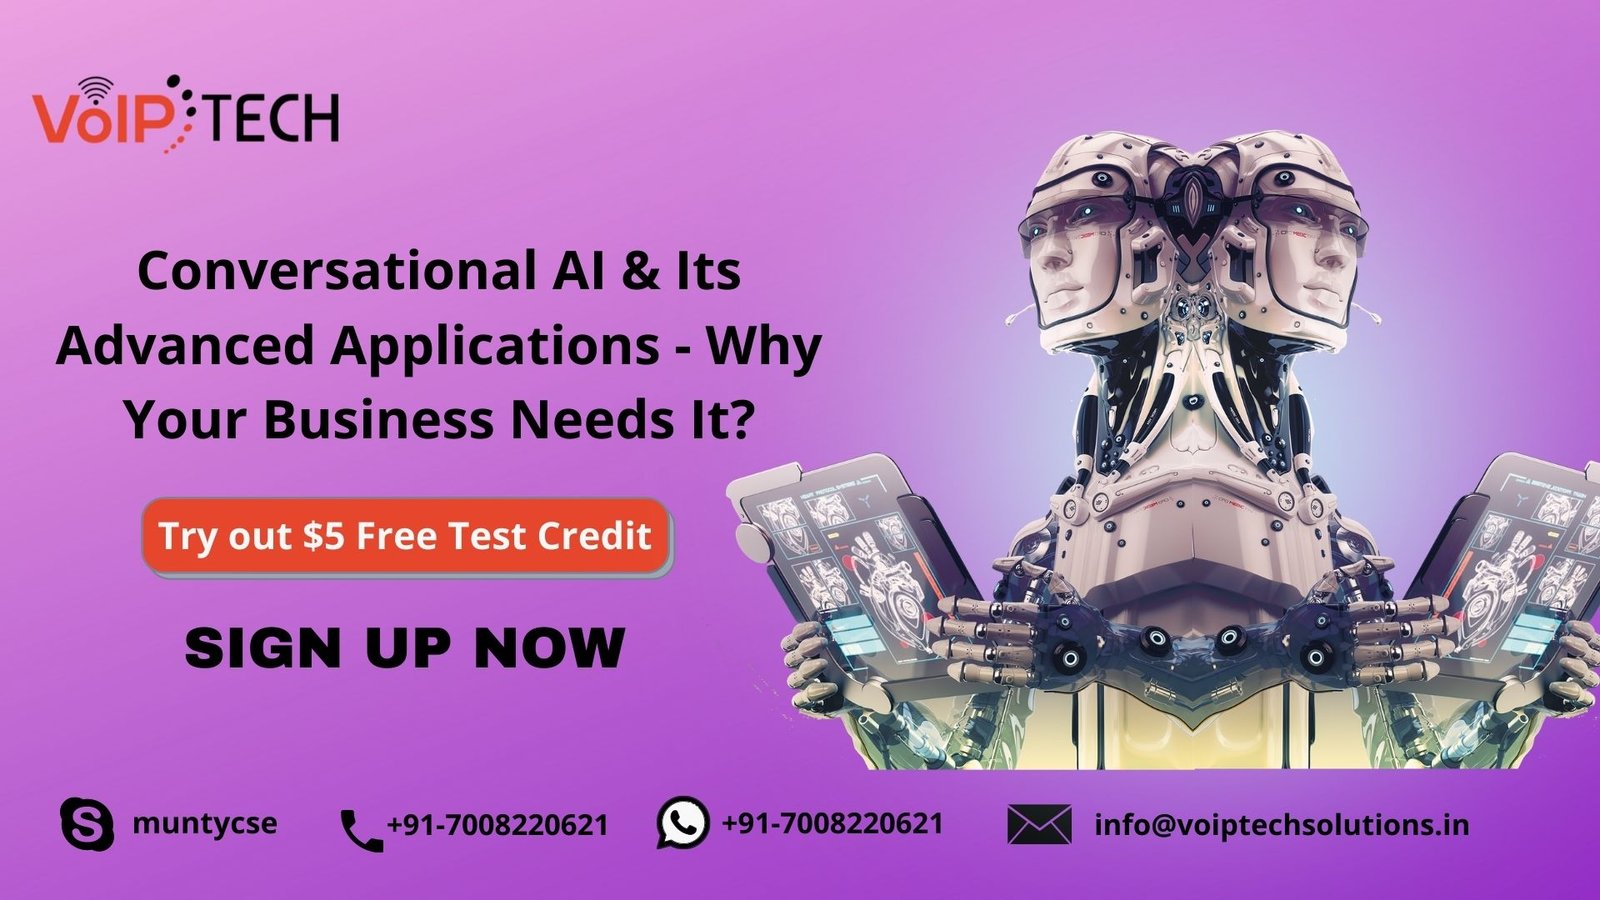 Conversational AI, Conversational AI & Its Advanced Applications - Why Your Business Needs It? , VoIP tech solutions, vici dialer, virtual number, Voip Providers, voip services in india, best sip provider, business voip providers, VoIP Phone Numbers, voip minutes provider, top voip providers, voip minutes, International VoIP Provider